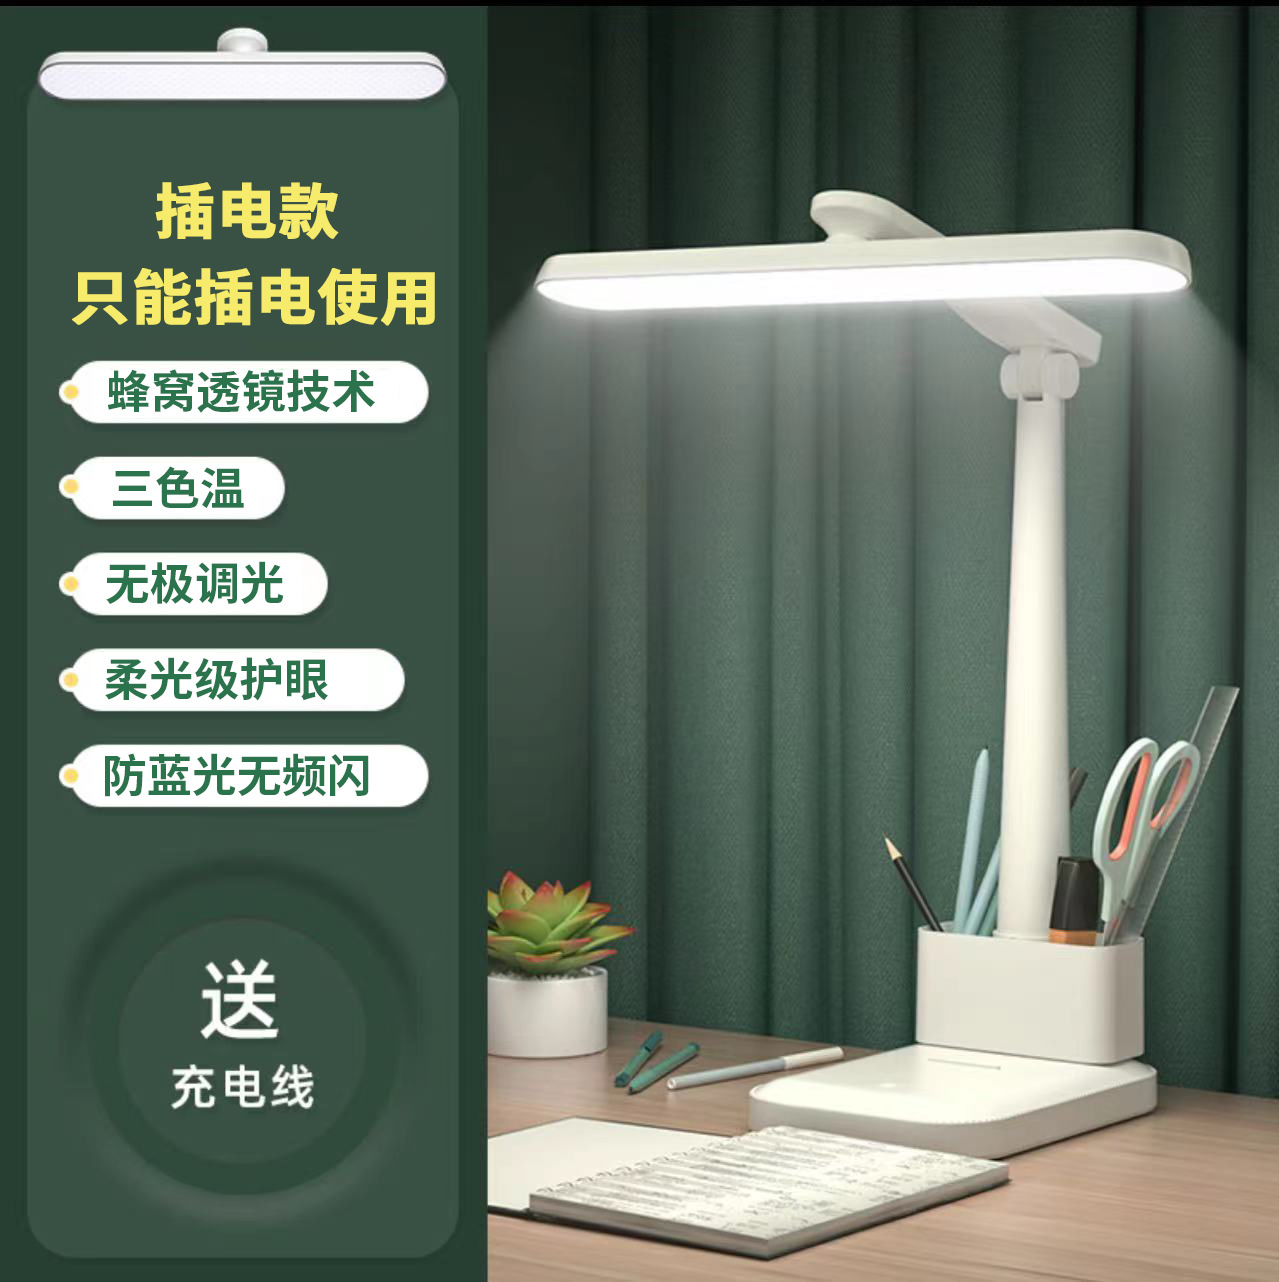 Eye Protection Desk Lamp Led Elementary School Student Study Dormitory Charging Reading Desk Folding Smart Touch Bedroom Bedside Lamp